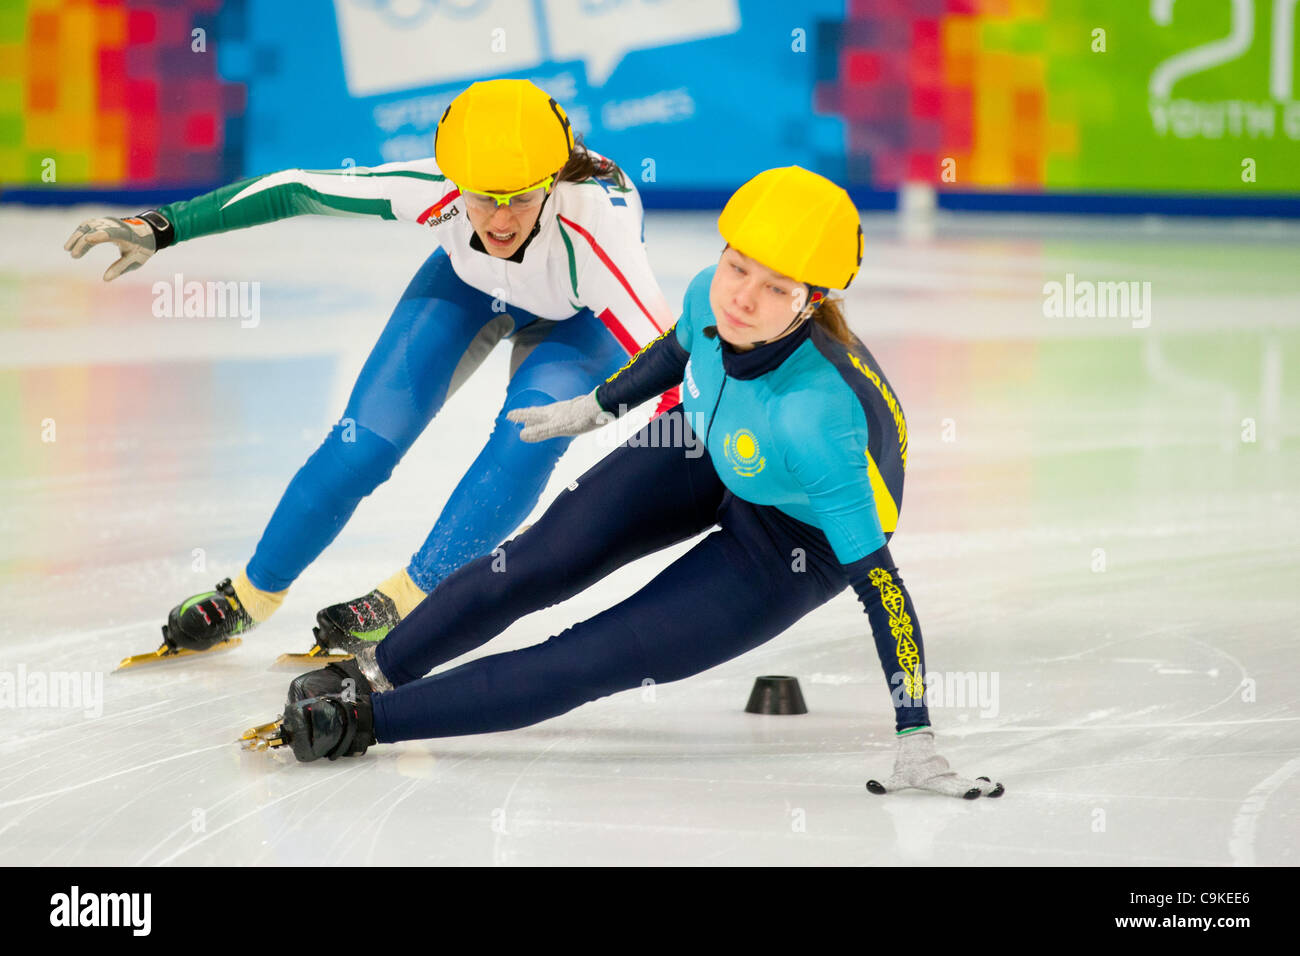 Jan. 18, 2012 - Innsbruck, Austria - Dariya Goncharov from Kazakistan falls on the ice as Nicole Martinelli from Italy chase during women's 1000m short track speed skating event at the Winter Youth Olympic Games (YOG) 2012. (Credit Image: © Marcello Farina/Southcreek/ZUMAPRESS.com) Stock Photo